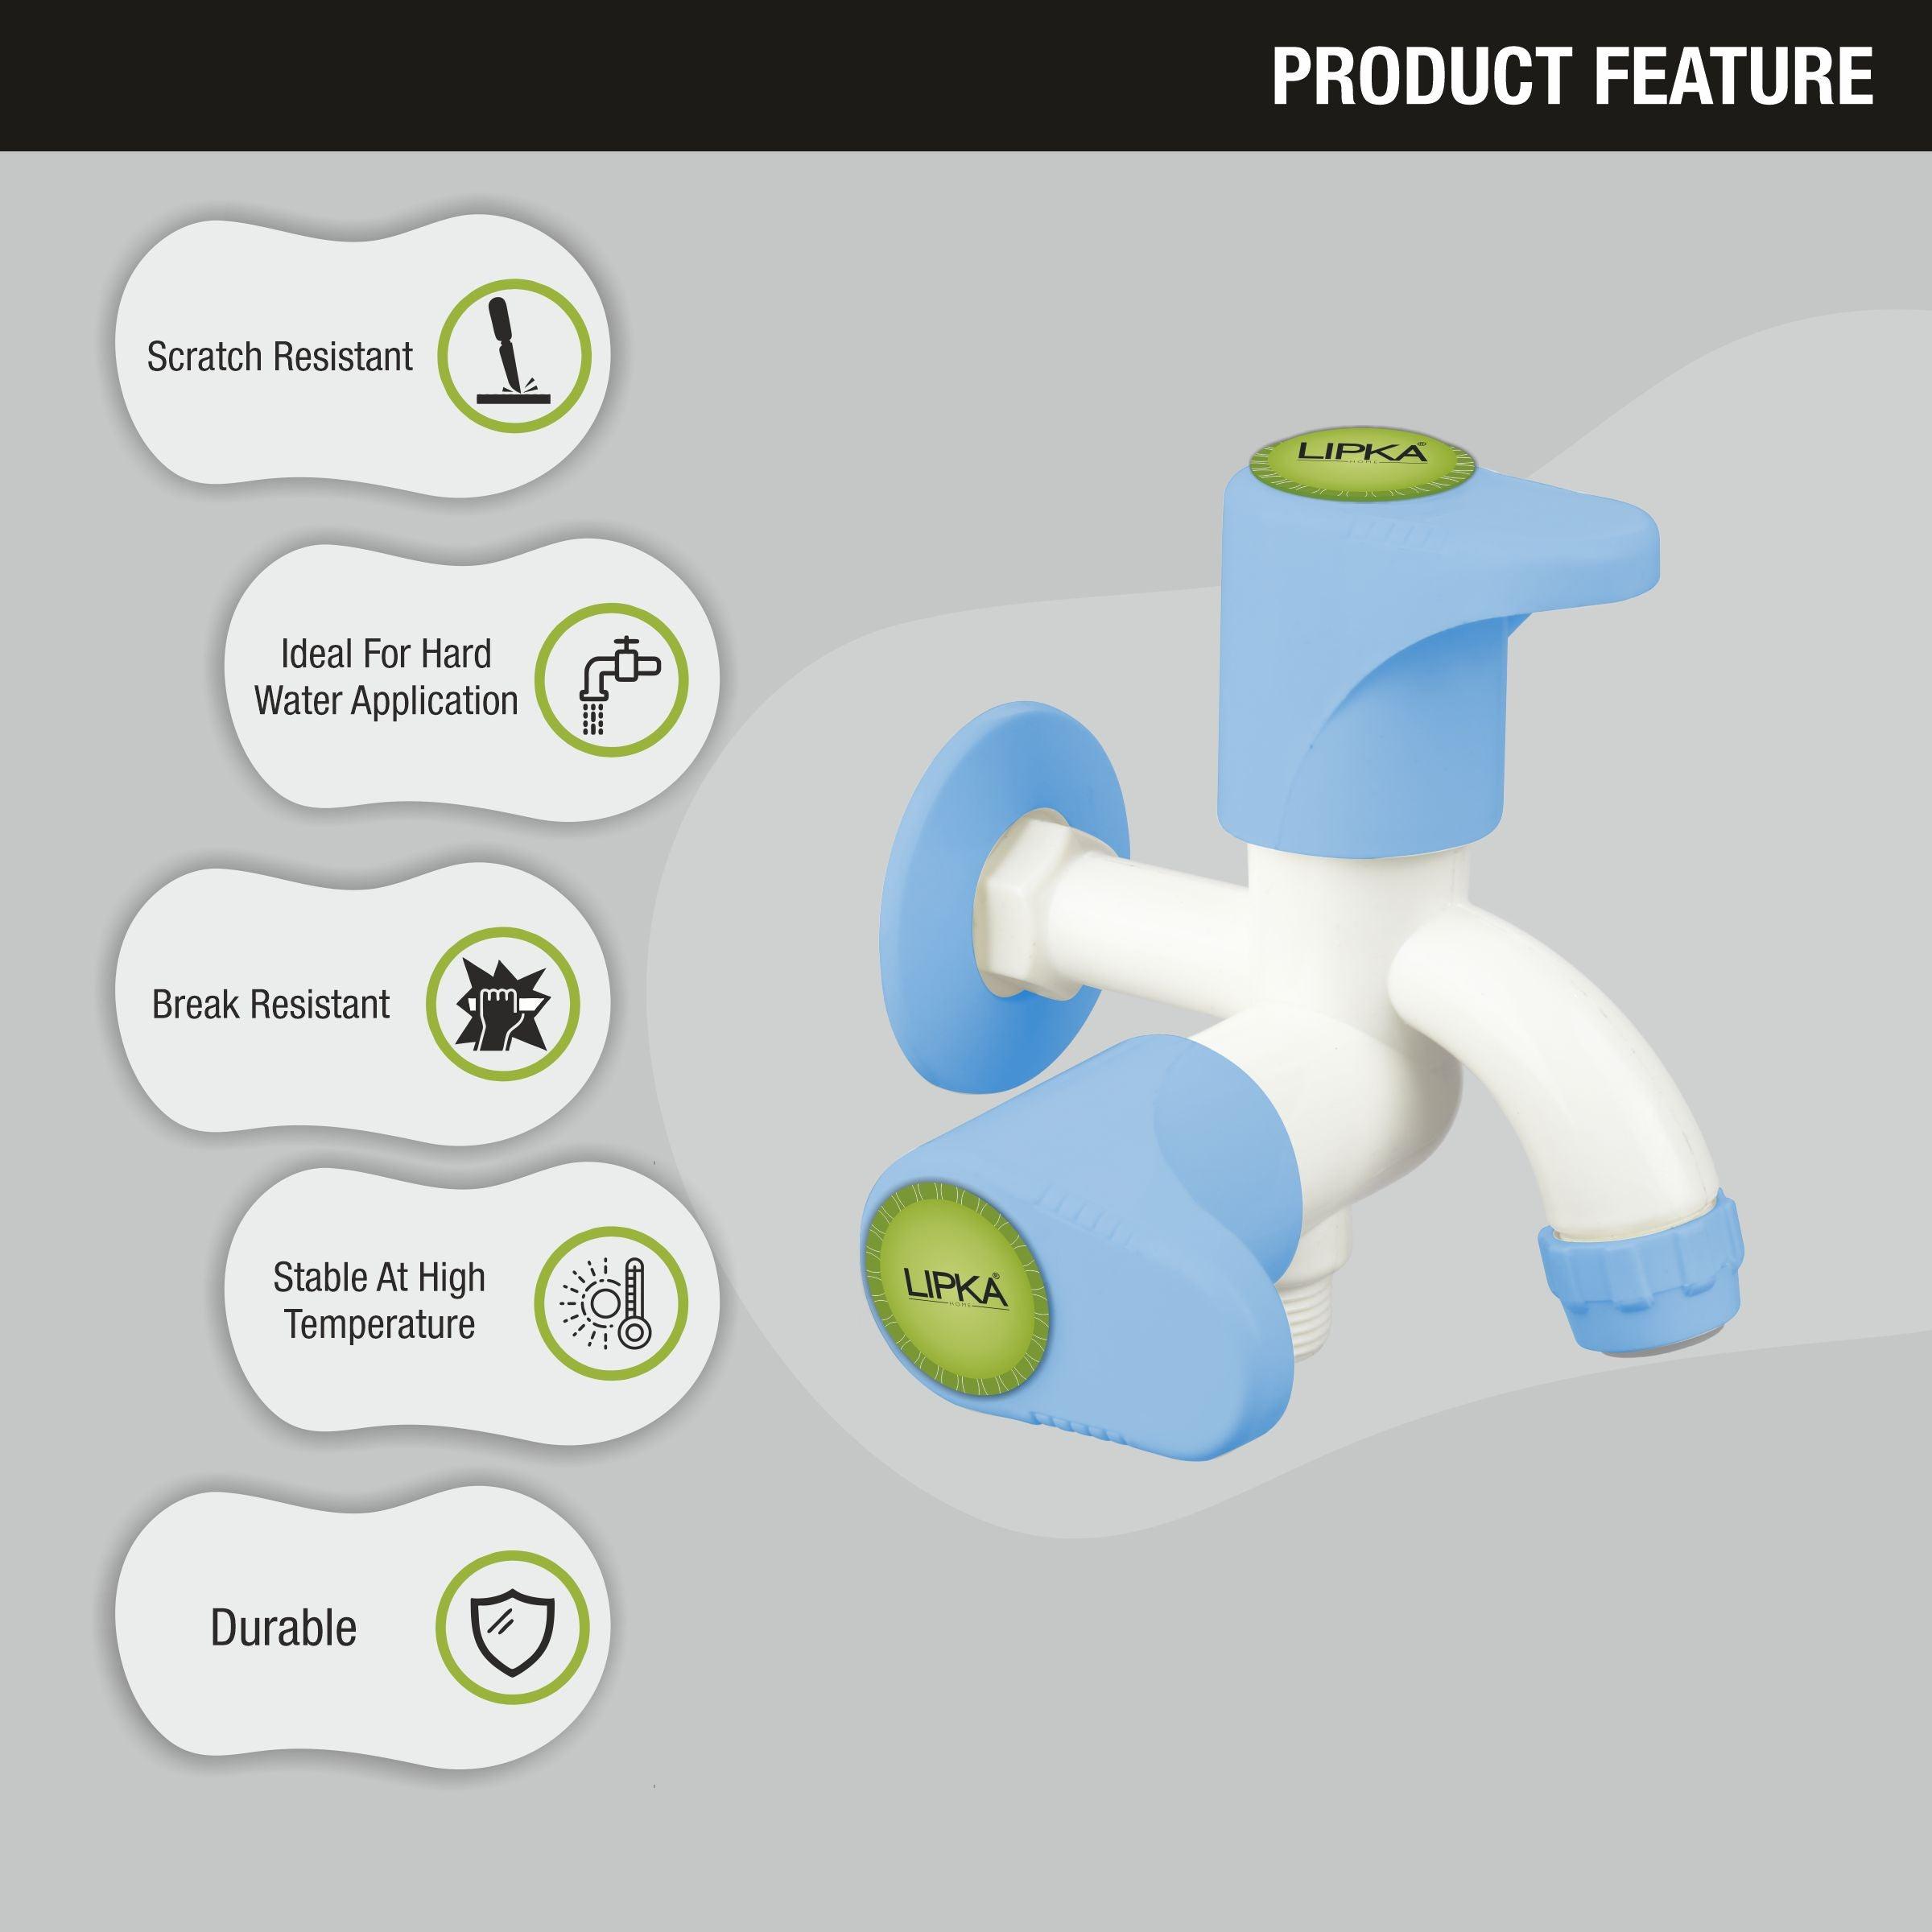 Glory Two Way Bib Tap PTMT Faucet (Double Handle) features